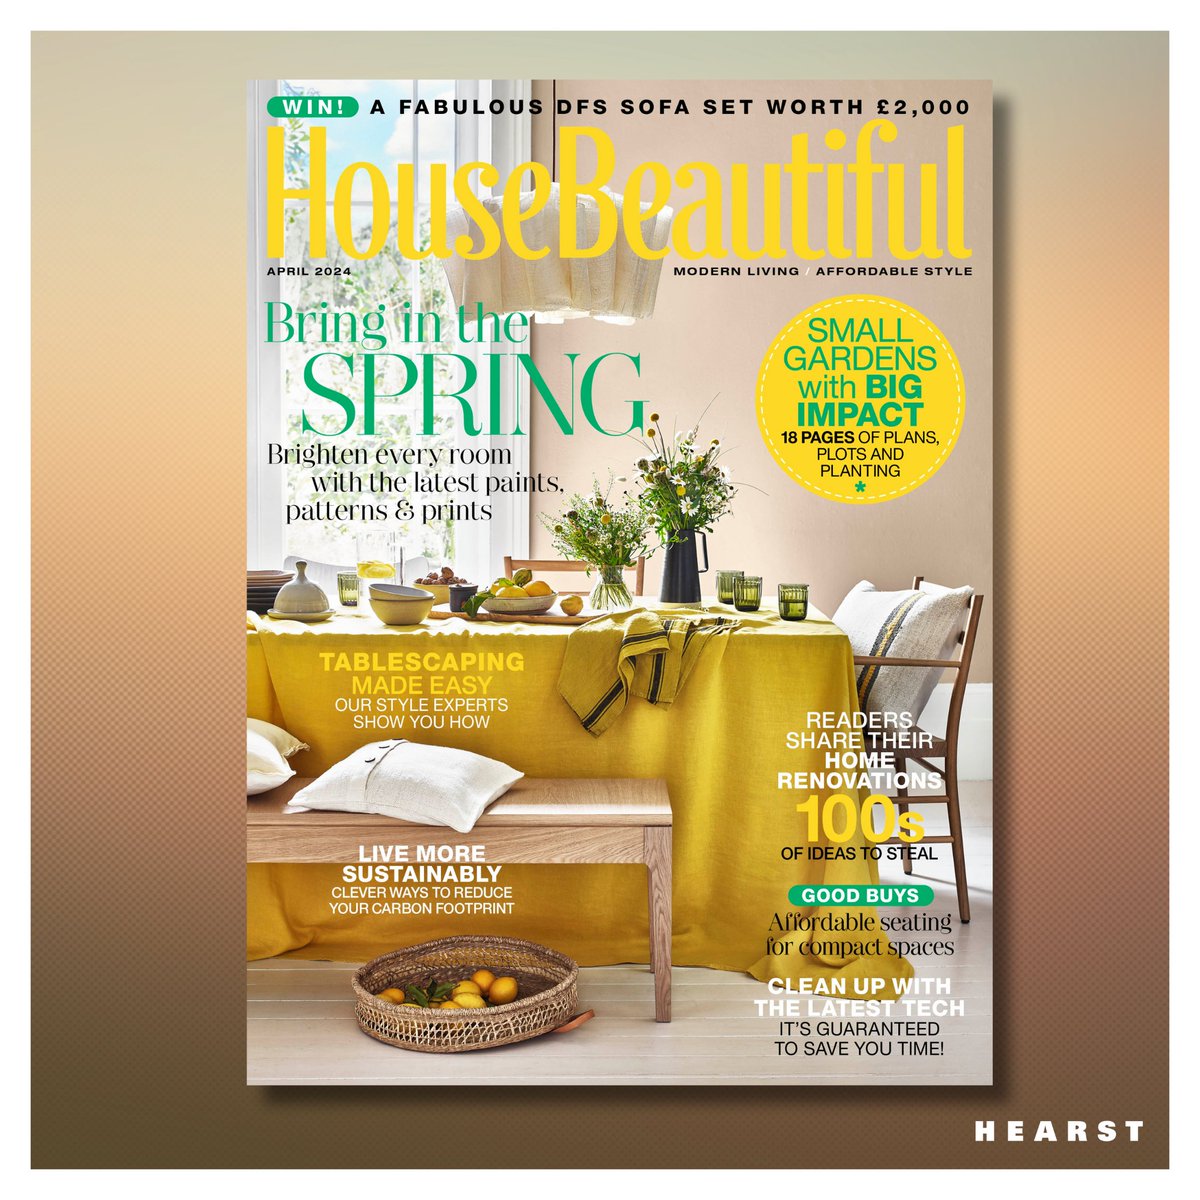 Brighten up your Tuesday with the new issue of House Beautiful UK.💛 In the issue, on sale now, find easy ways to bring the spring season into your home, from Easter tablescape trends, bright ideas for the latest paints, patterns and prints, and a small garden special. 🪴@HB